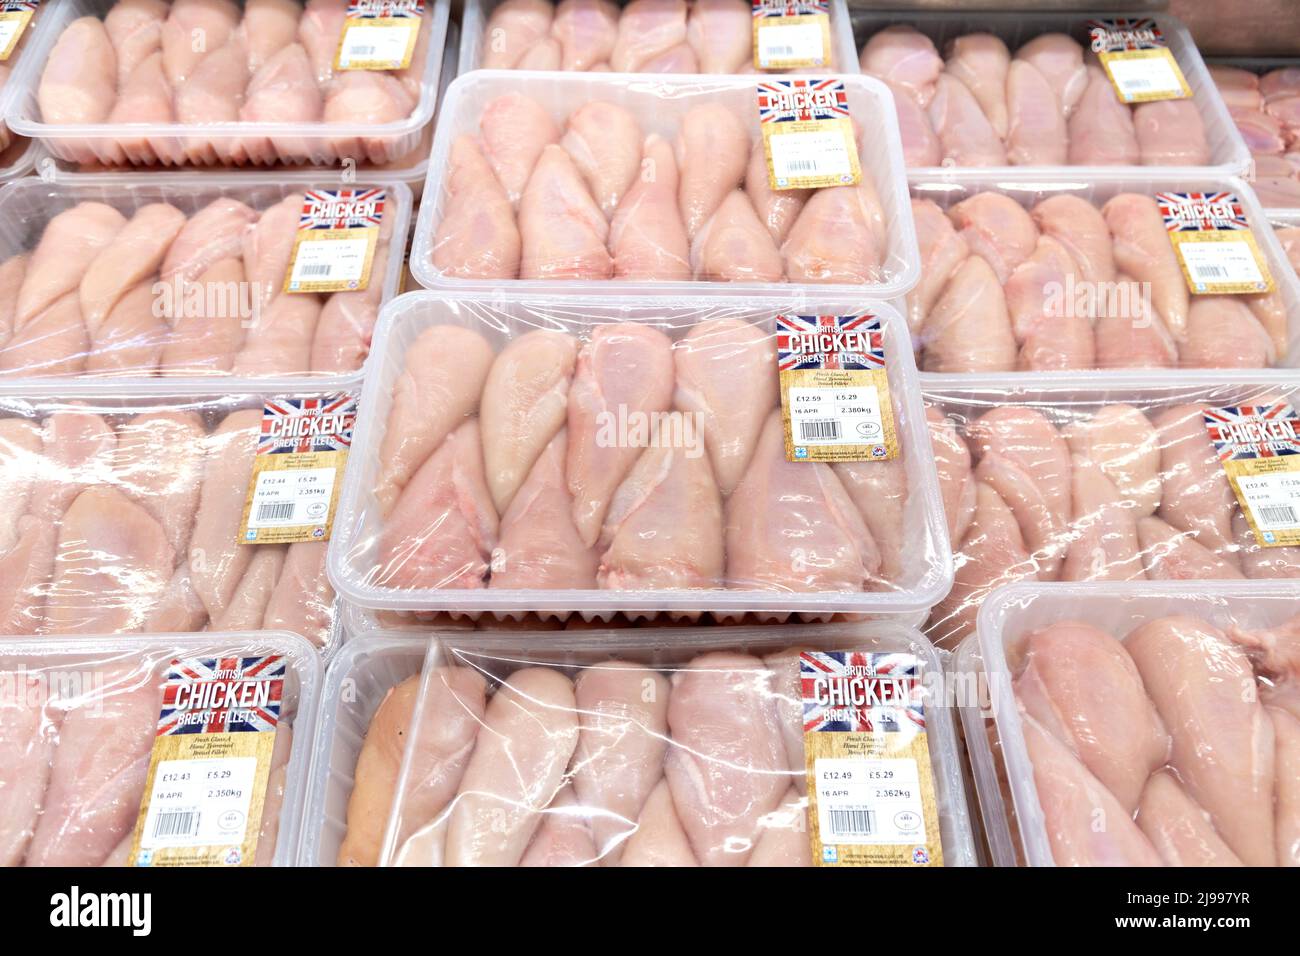 Packaged raw chicken breasts in a supermarket fridge Stock Photo